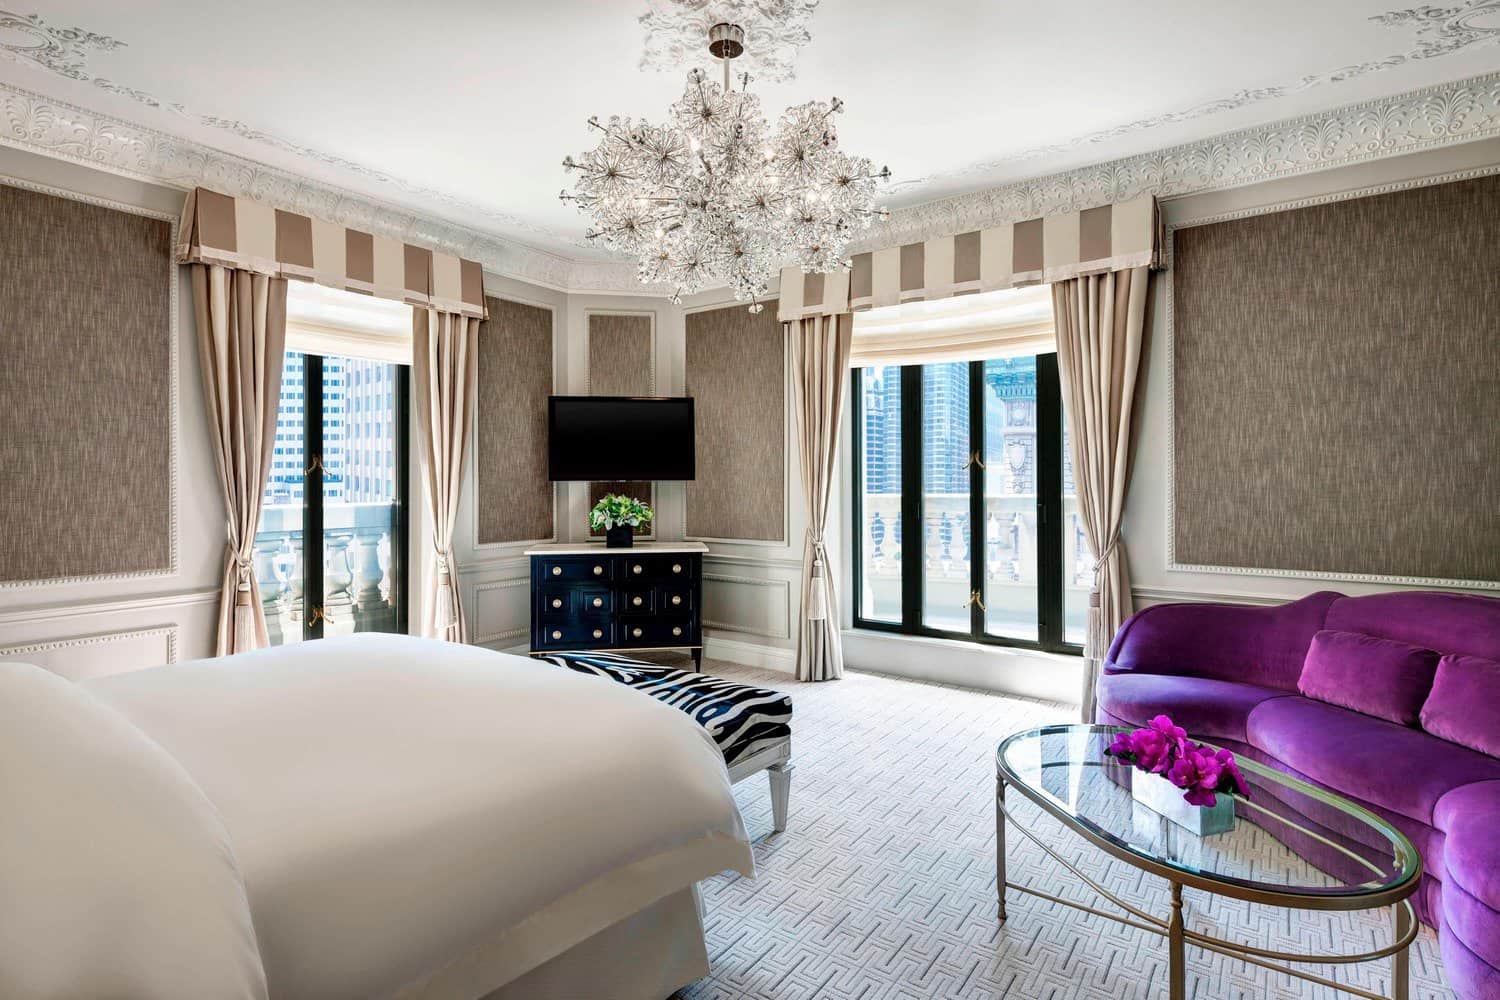 The Presidential Suite at The St. Regis New York Bedroom